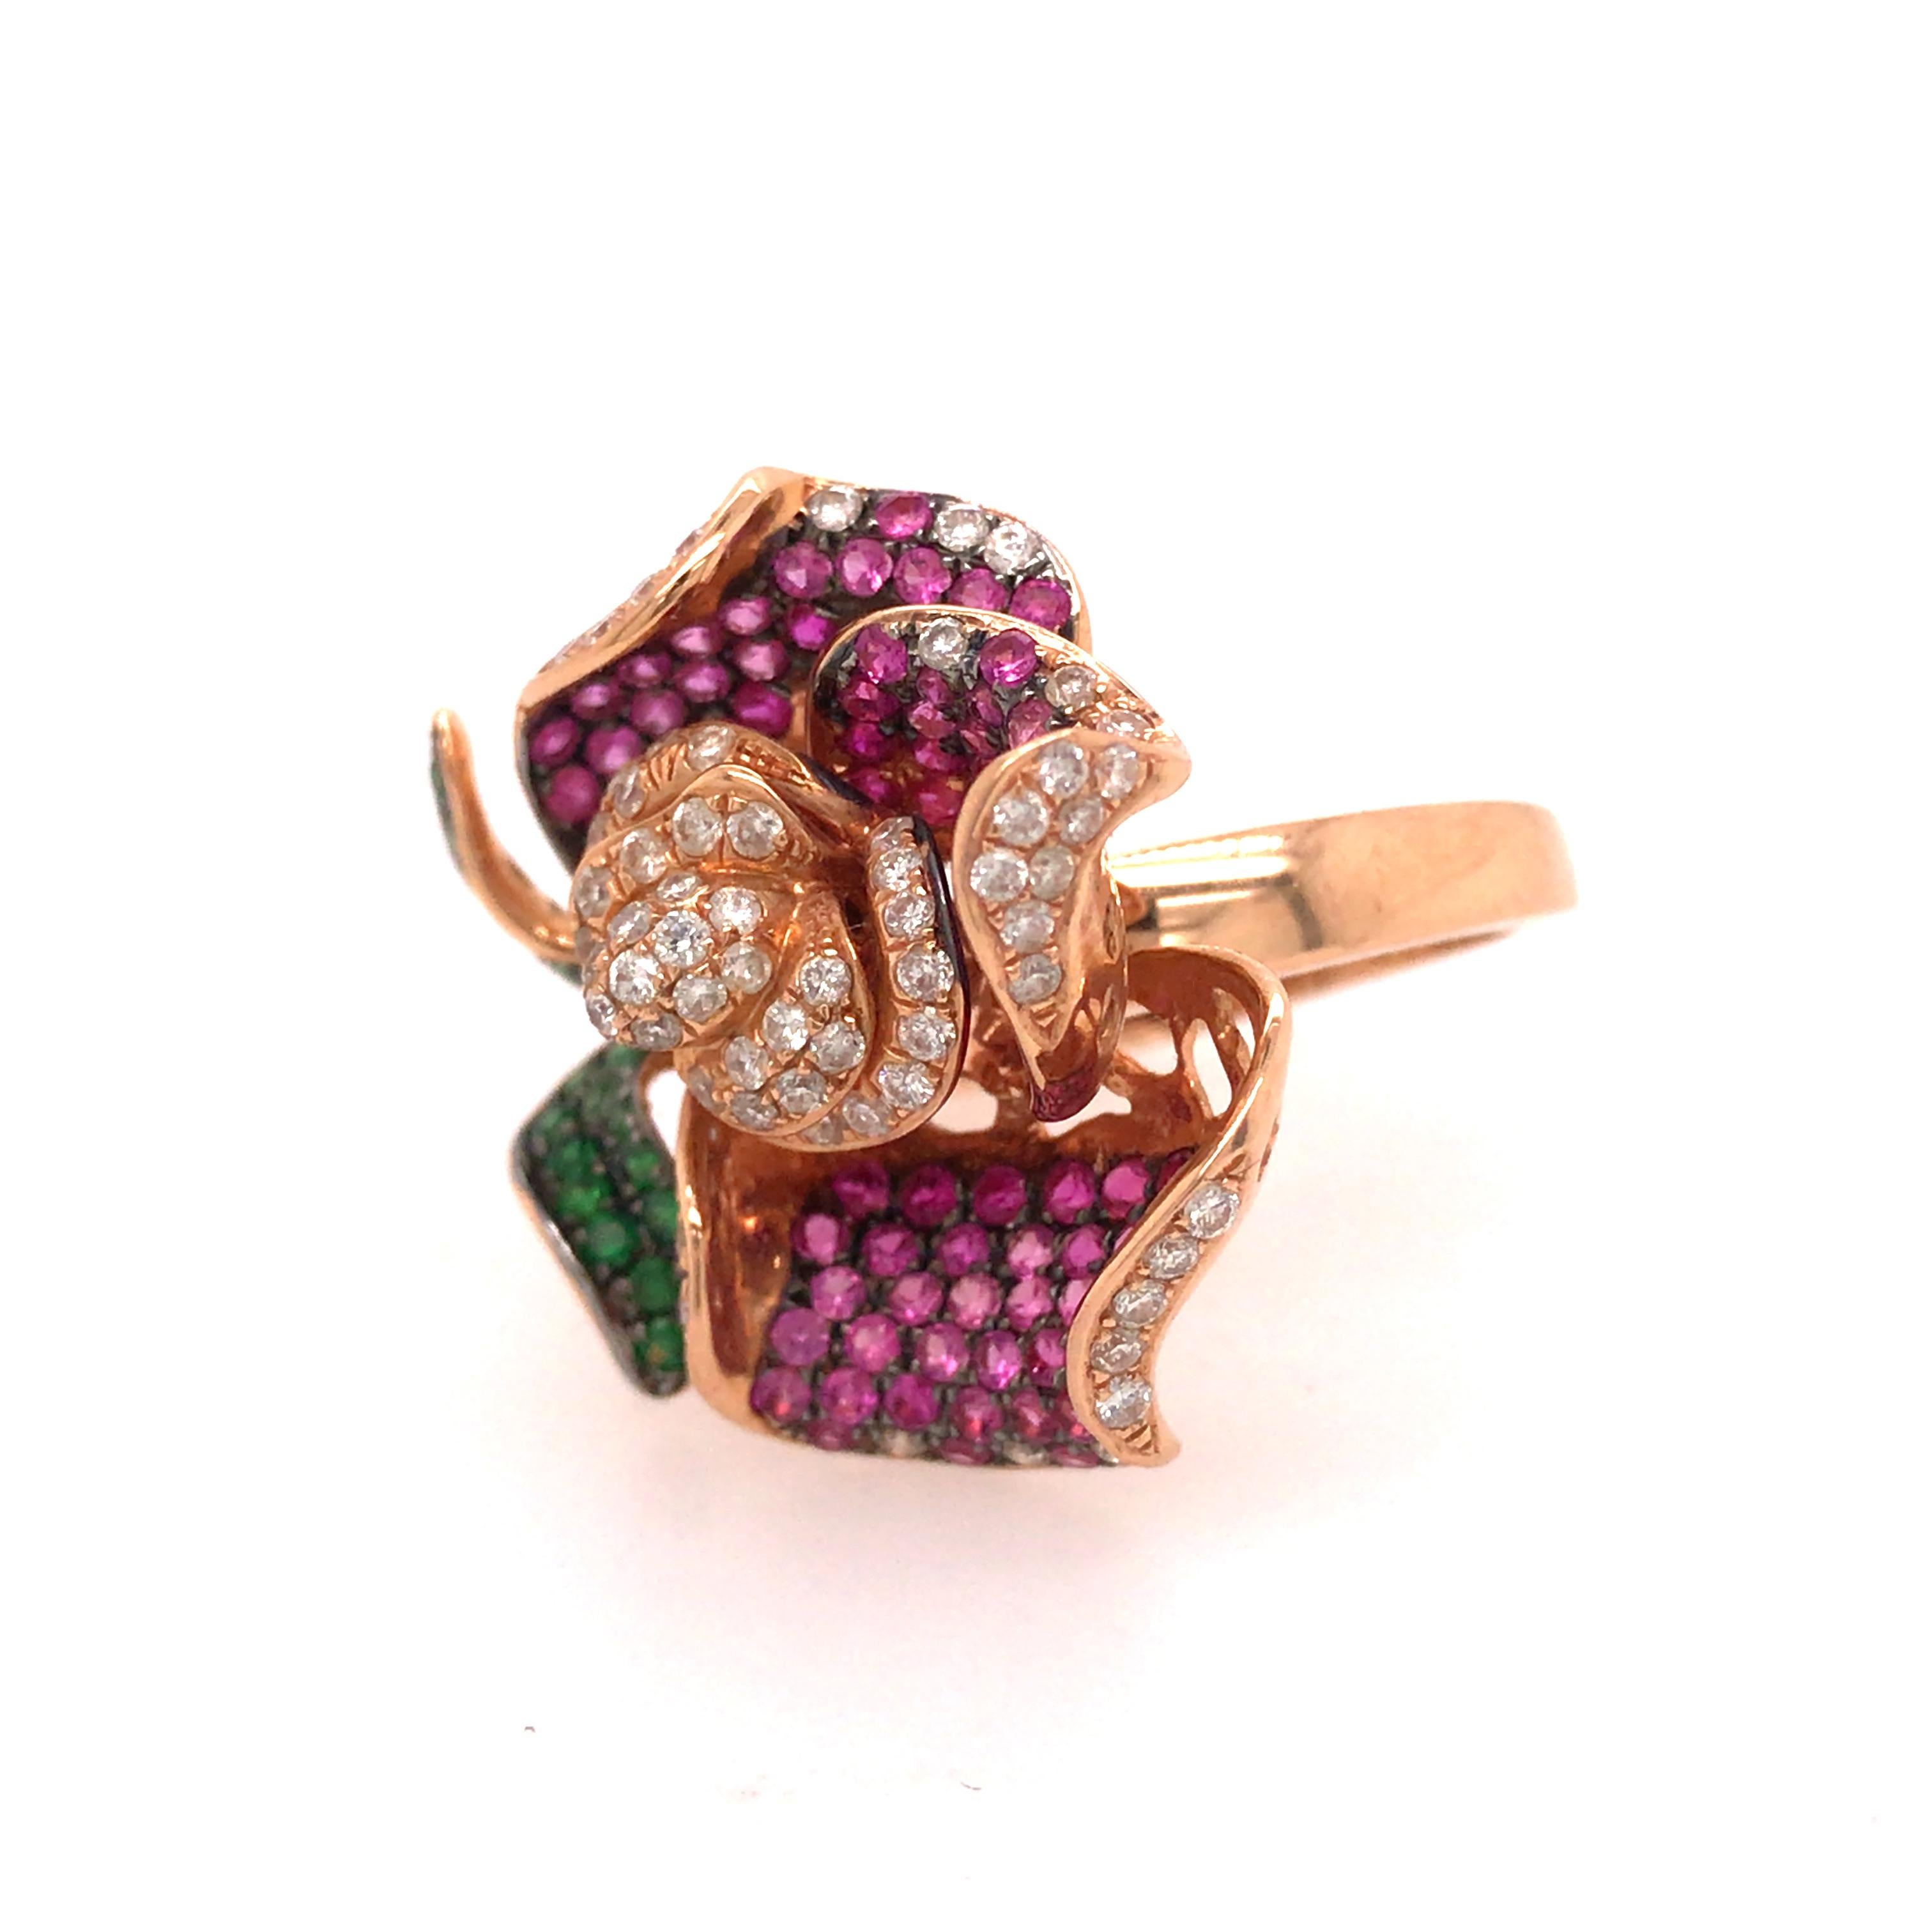 Diamond, Sapphire and Tsavorite Flower Ring in 18K Rose Gold.  (72) Round Brilliant Cut Diamonds weighing 0.75 carat total weight, G-H in color and VS in clarity, (92) Pink Sapphires weighing 1.8 carat total weight and (21) Tsavorite Stones weighing